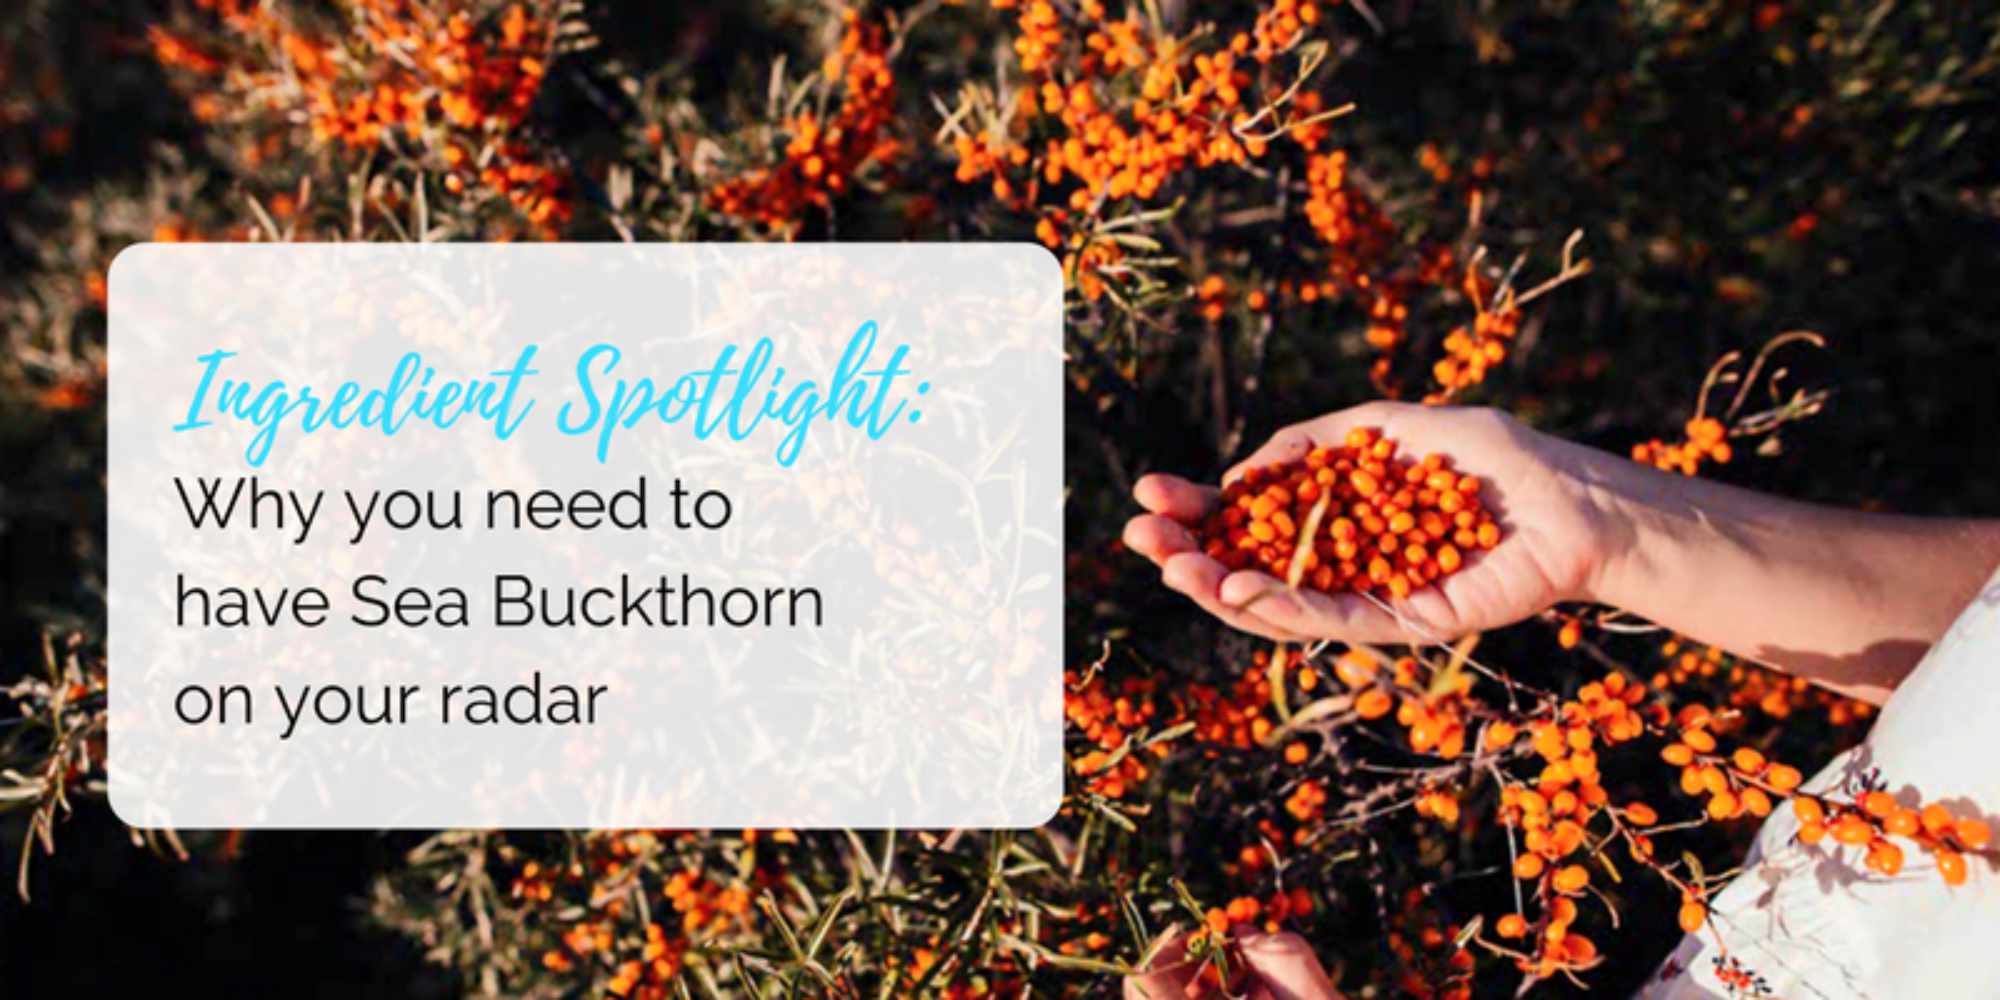 Why you need to have Sea Buckthorn on your radar